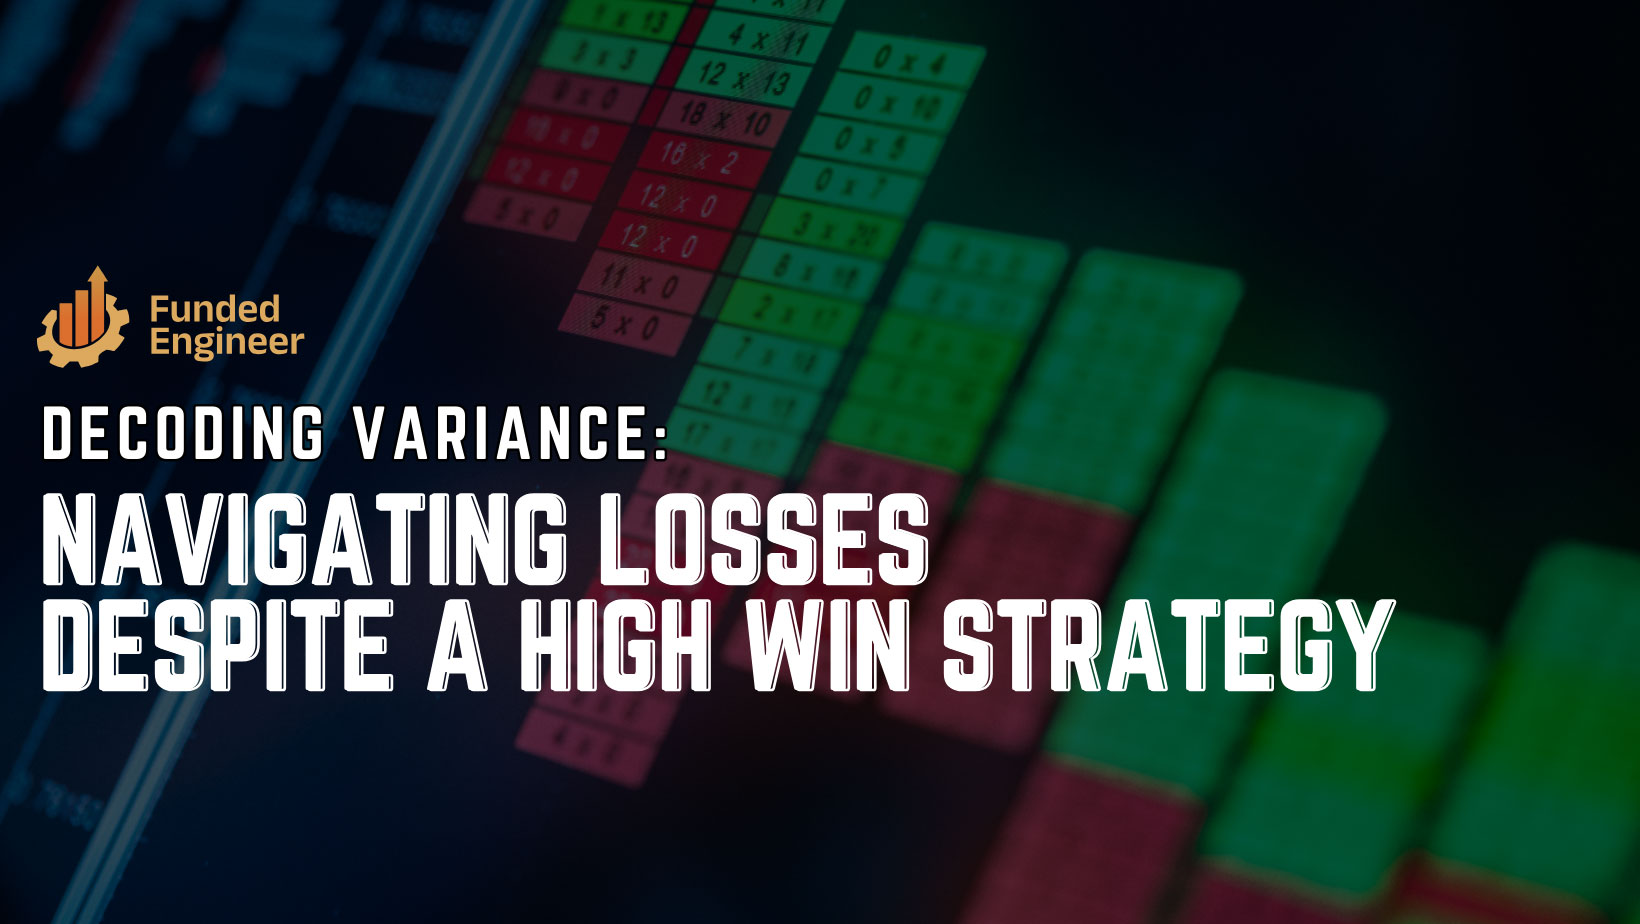 Decoding Variance: Navigating Losses Despite a High Win Strategy